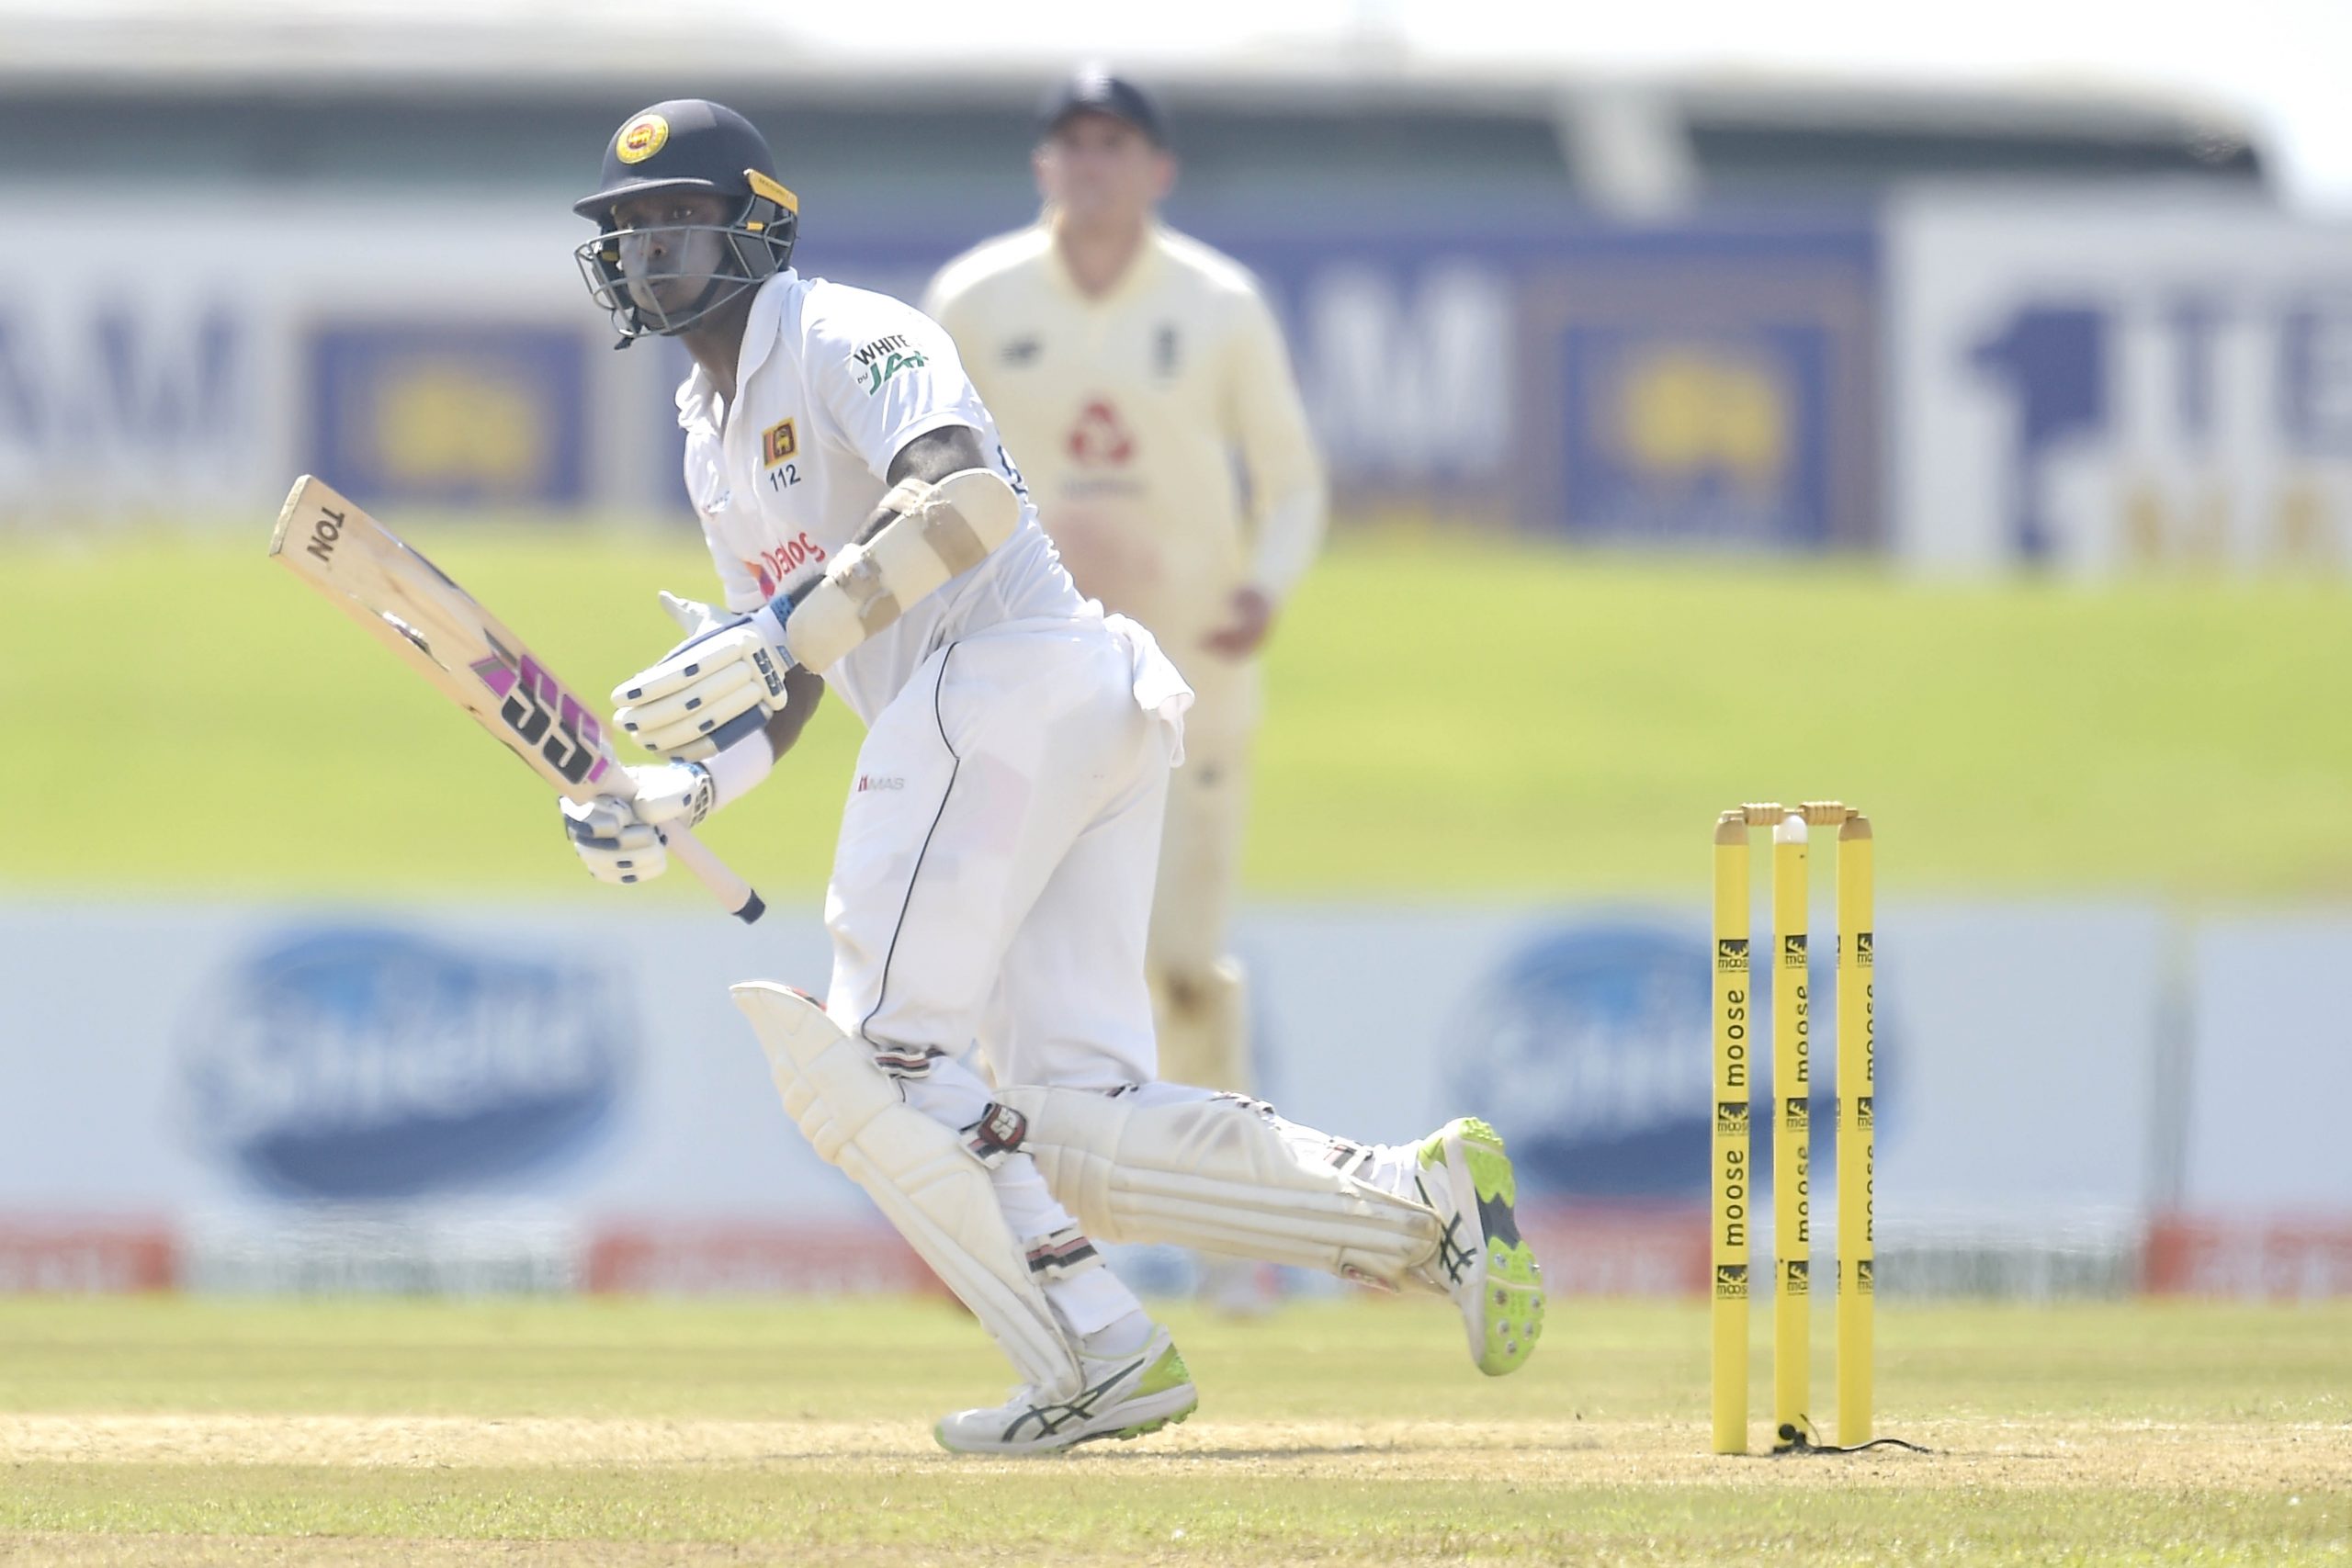 Angelo Mathews available for selections for the upcoming tours